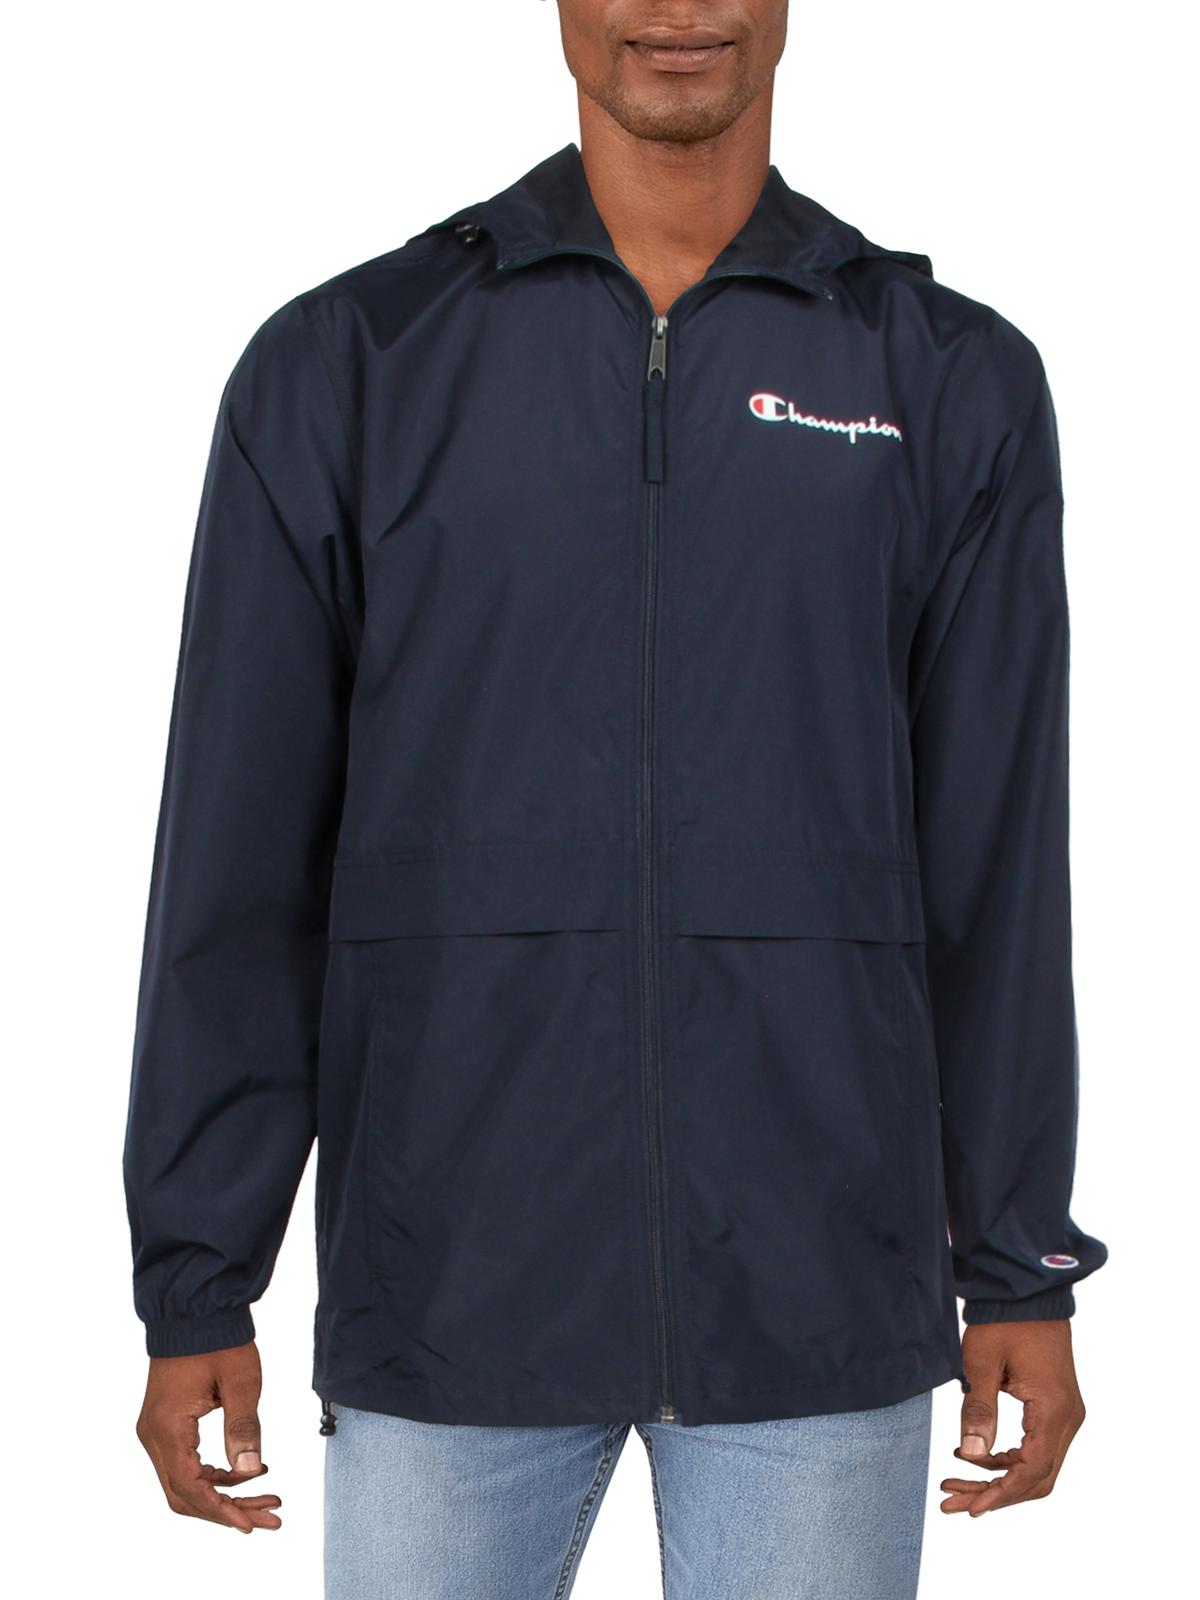 CHAMPION Mens Water Resistant Performance Athletic Jacket